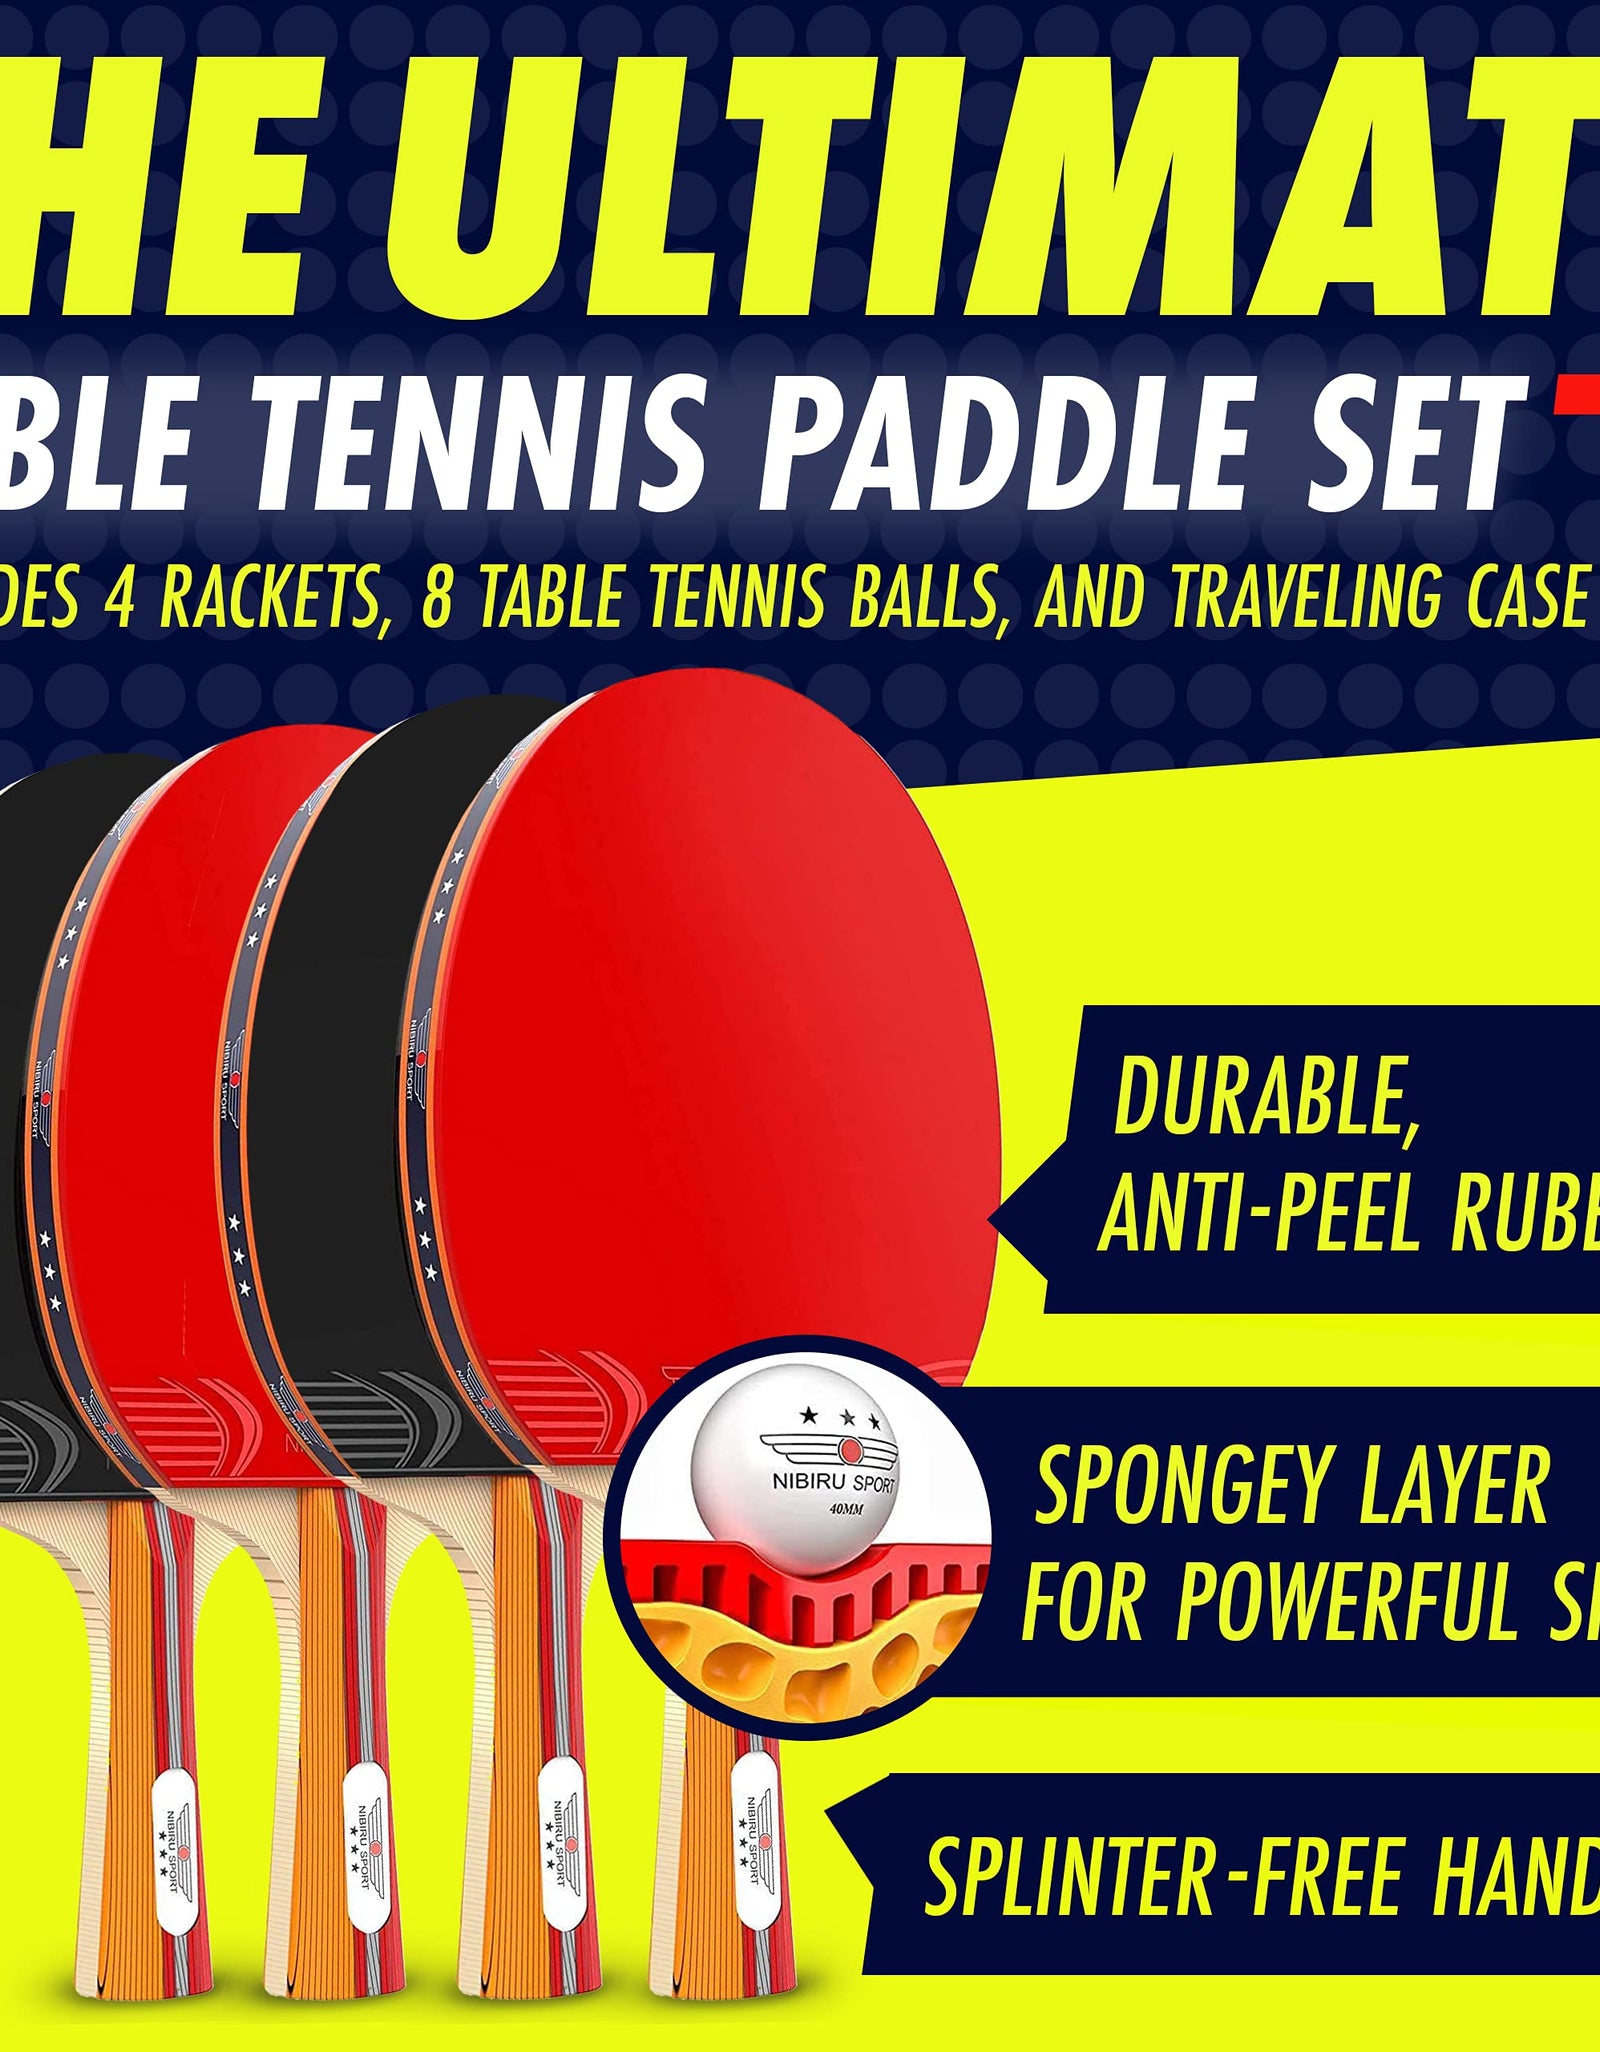 Nibiru Sport Ping Pong Paddles Set of 4 - Table Tennis Paddles, 8 Balls, Storage Case - Table Tennis Rackets & Game Accessories